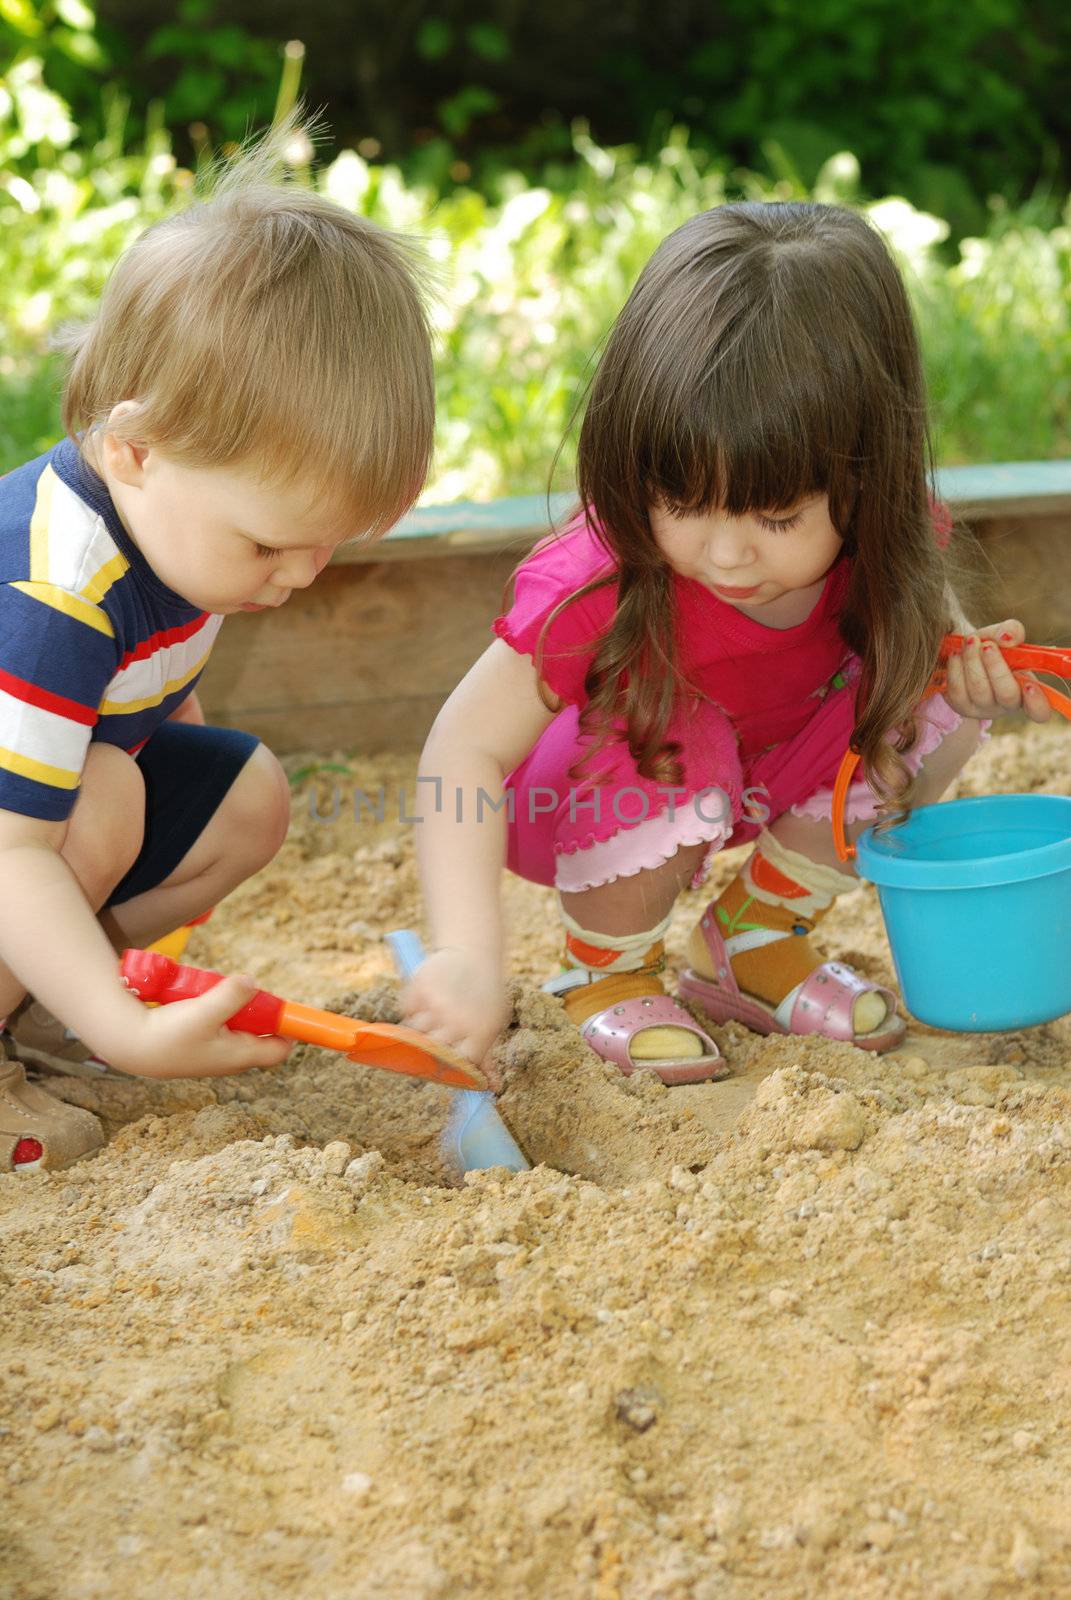 The boy and girl playing to a sandbox by galdzer